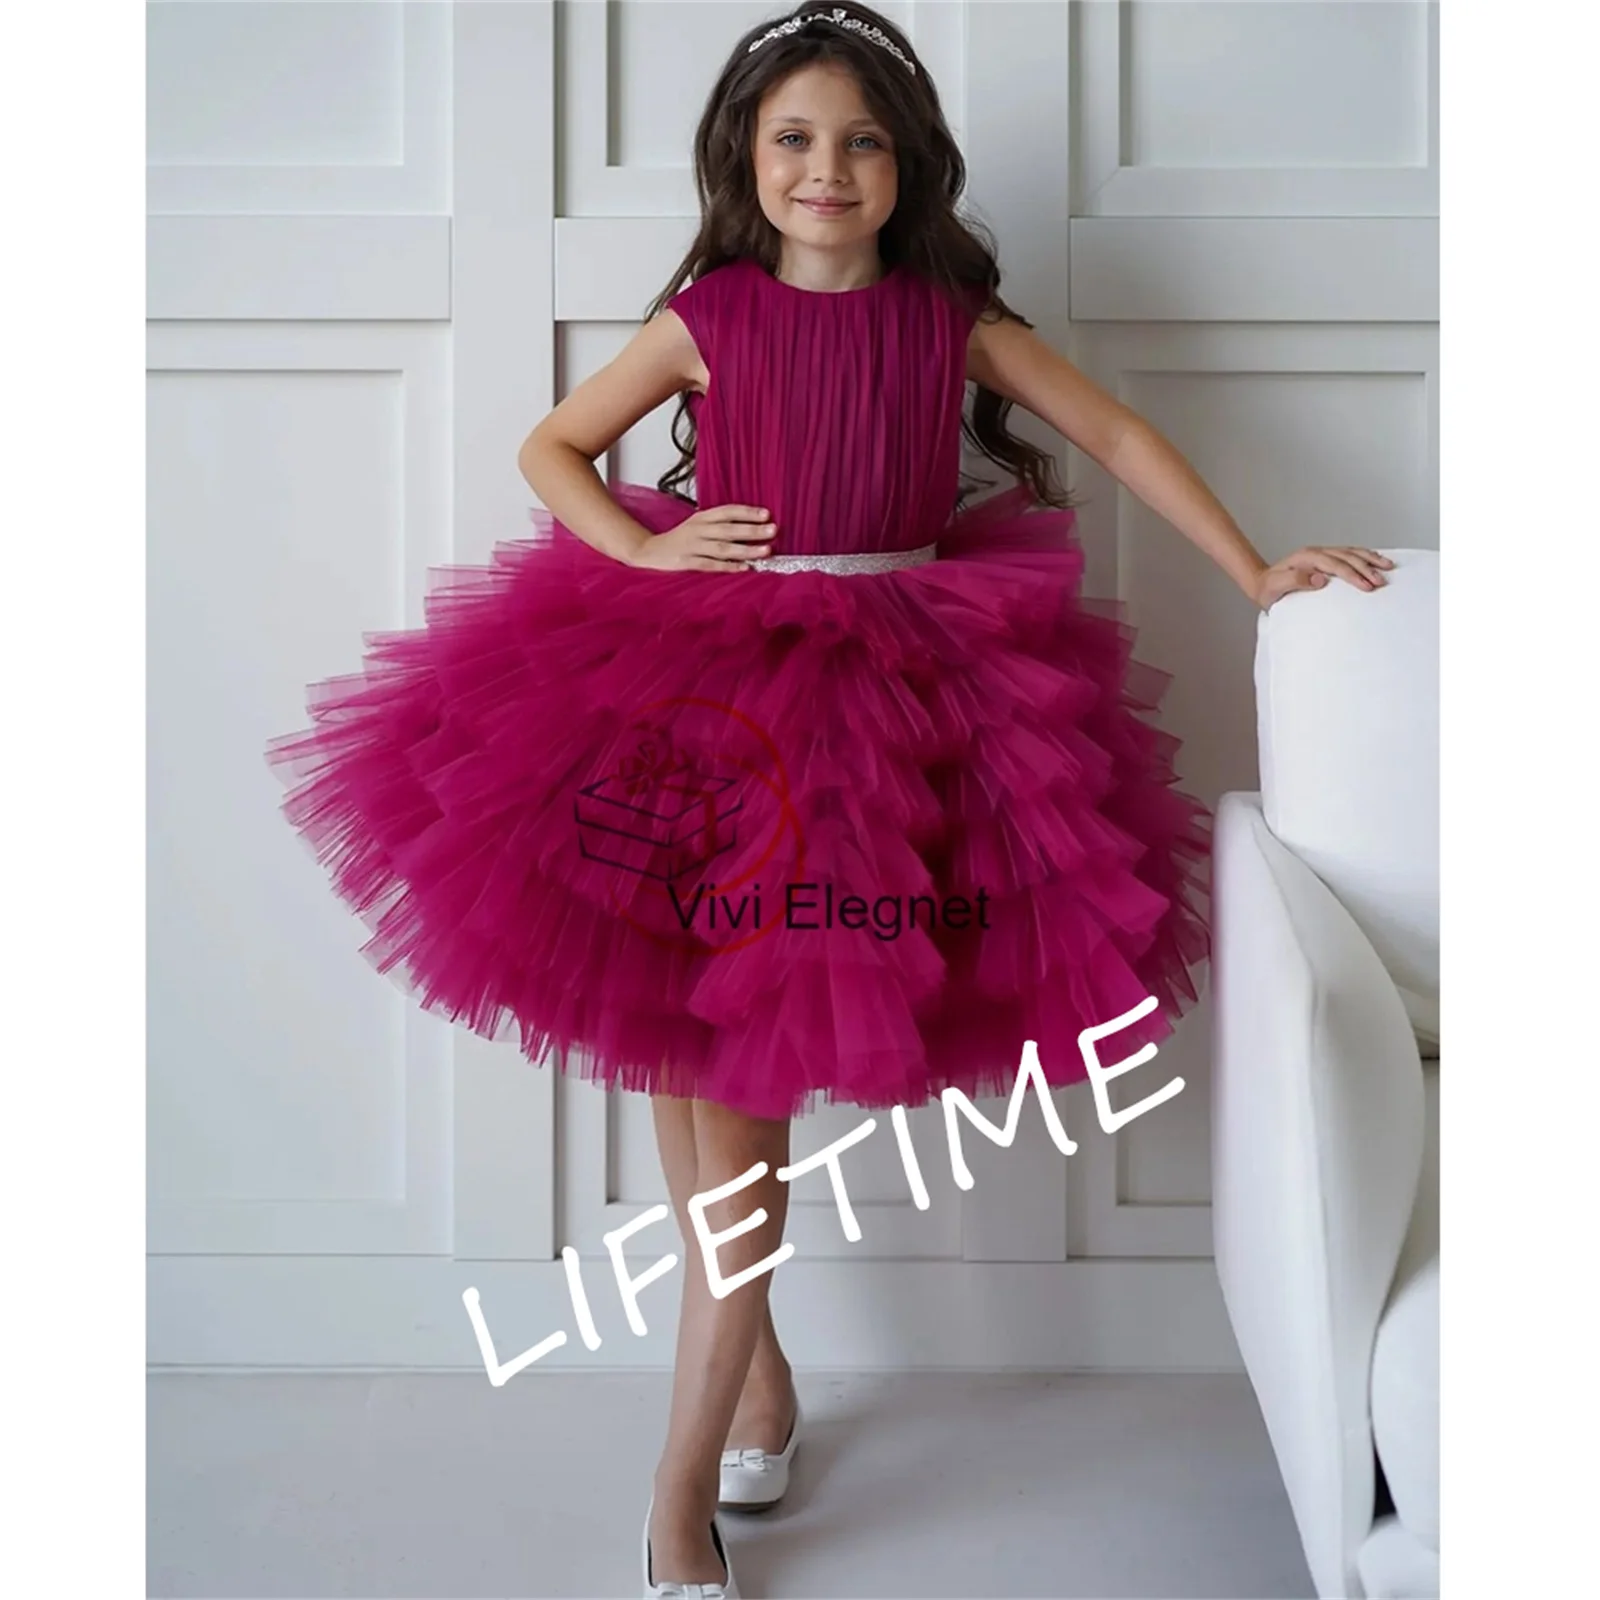 

Burgundy Tiered Sleeveless Fashion Flower Girl Dresses New Pleat Wedding Party Gowns with Belt فساتين اطفال للعيد Zipper Back